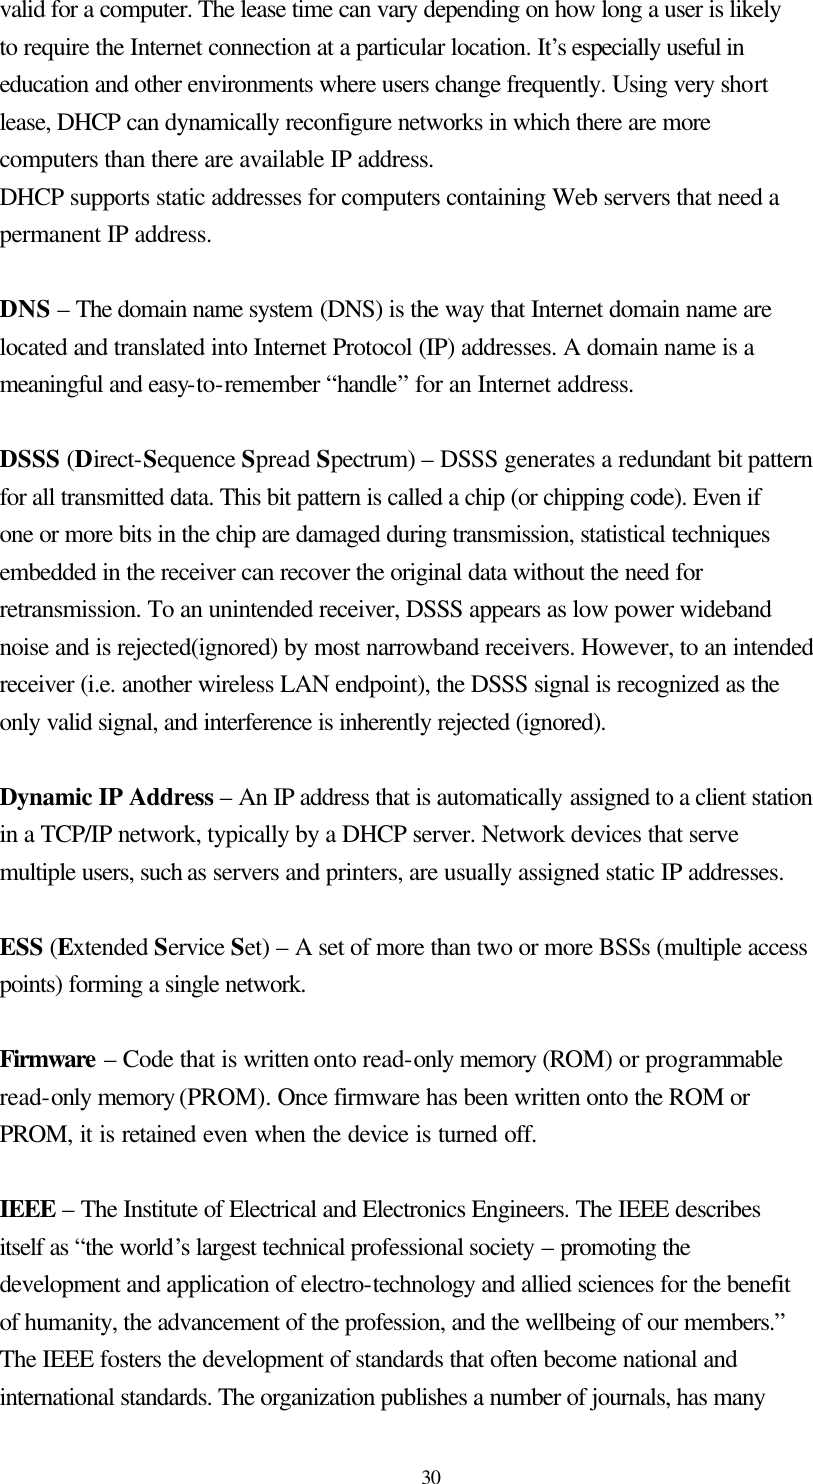  30 valid for a computer. The lease time can vary depending on how long a user is likely to require the Internet connection at a particular location. It’s especially useful in education and other environments where users change frequently. Using very short lease, DHCP can dynamically reconfigure networks in which there are more computers than there are available IP address. DHCP supports static addresses for computers containing Web servers that need a permanent IP address.    DNS – The domain name system (DNS) is the way that Internet domain name are located and translated into Internet Protocol (IP) addresses. A domain name is a meaningful and easy-to-remember “handle” for an Internet address.  DSSS (Direct-Sequence Spread Spectrum) – DSSS generates a redundant bit pattern for all transmitted data. This bit pattern is called a chip (or chipping code). Even if one or more bits in the chip are damaged during transmission, statistical techniques embedded in the receiver can recover the original data without the need for retransmission. To an unintended receiver, DSSS appears as low power wideband noise and is rejected(ignored) by most narrowband receivers. However, to an intended receiver (i.e. another wireless LAN endpoint), the DSSS signal is recognized as the only valid signal, and interference is inherently rejected (ignored).  Dynamic IP Address – An IP address that is automatically assigned to a client station in a TCP/IP network, typically by a DHCP server. Network devices that serve multiple users, such as servers and printers, are usually assigned static IP addresses.  ESS (Extended Service Set) – A set of more than two or more BSSs (multiple access points) forming a single network.  Firmware – Code that is written onto read-only memory (ROM) or programmable read-only memory (PROM). Once firmware has been written onto the ROM or PROM, it is retained even when the device is turned off.    IEEE – The Institute of Electrical and Electronics Engineers. The IEEE describes itself as “the world’s largest technical professional society – promoting the development and application of electro-technology and allied sciences for the benefit of humanity, the advancement of the profession, and the wellbeing of our members.” The IEEE fosters the development of standards that often become national and international standards. The organization publishes a number of journals, has many 